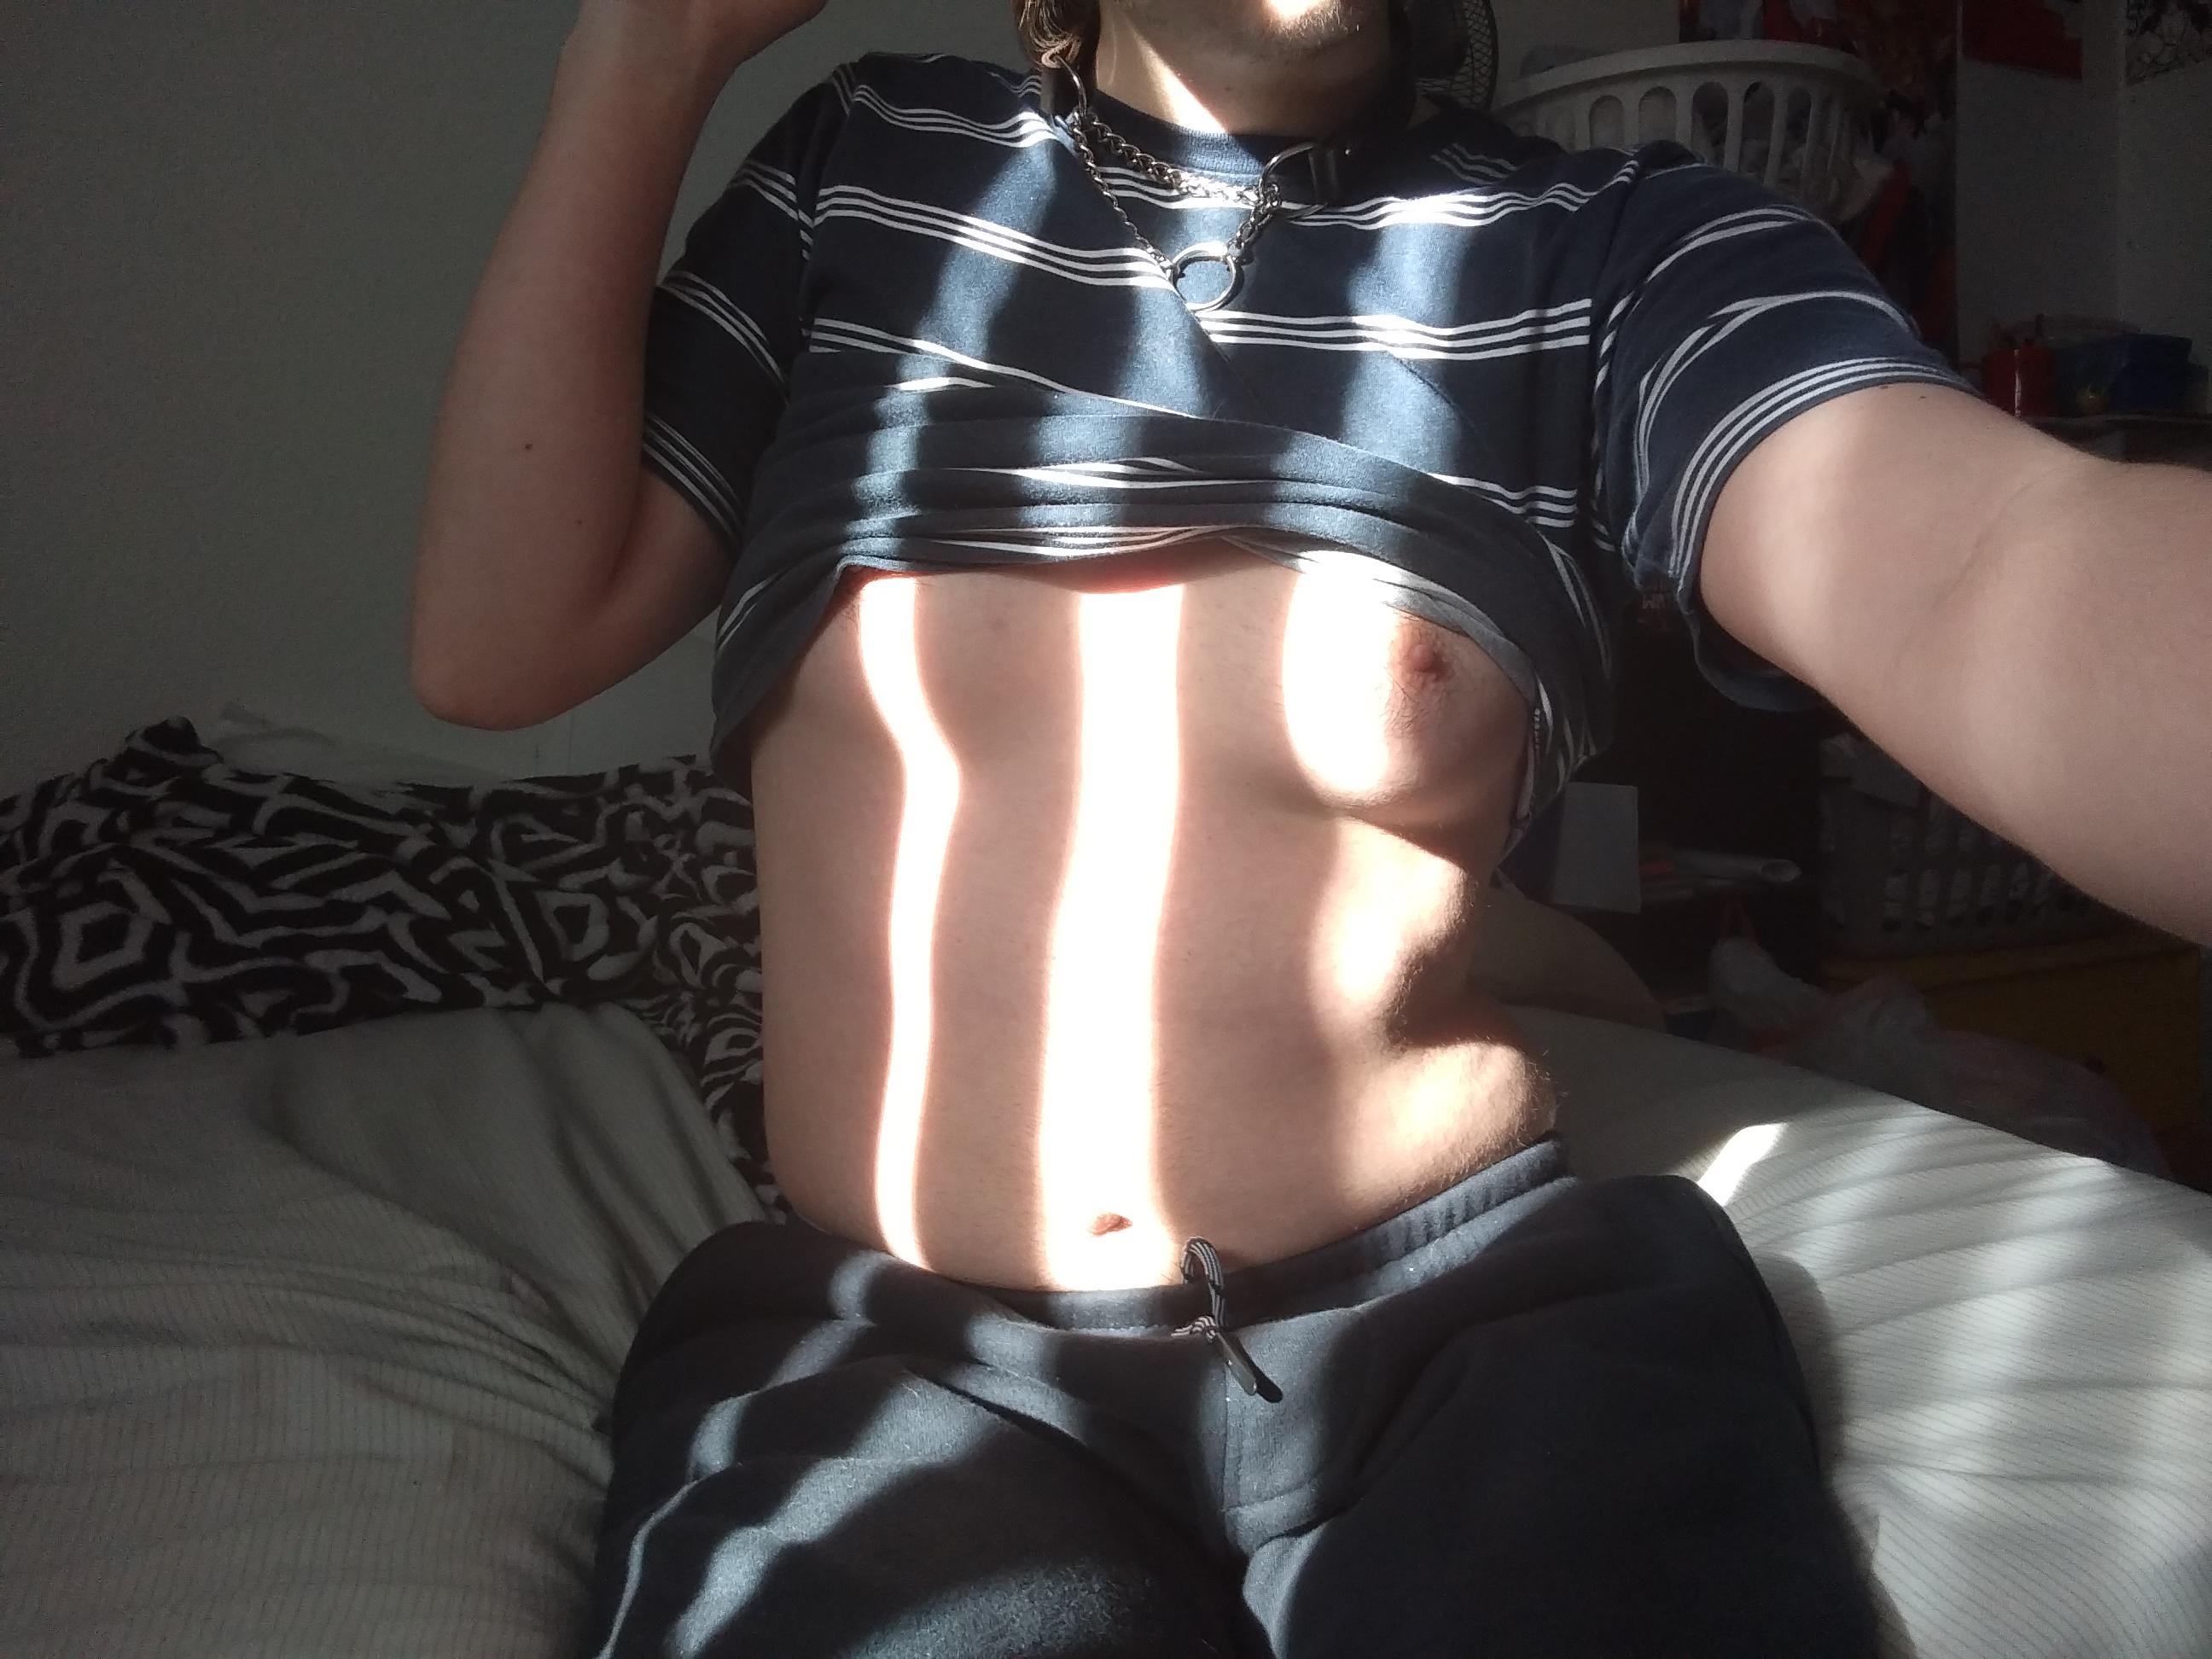 sweatpants stripes and sunlight